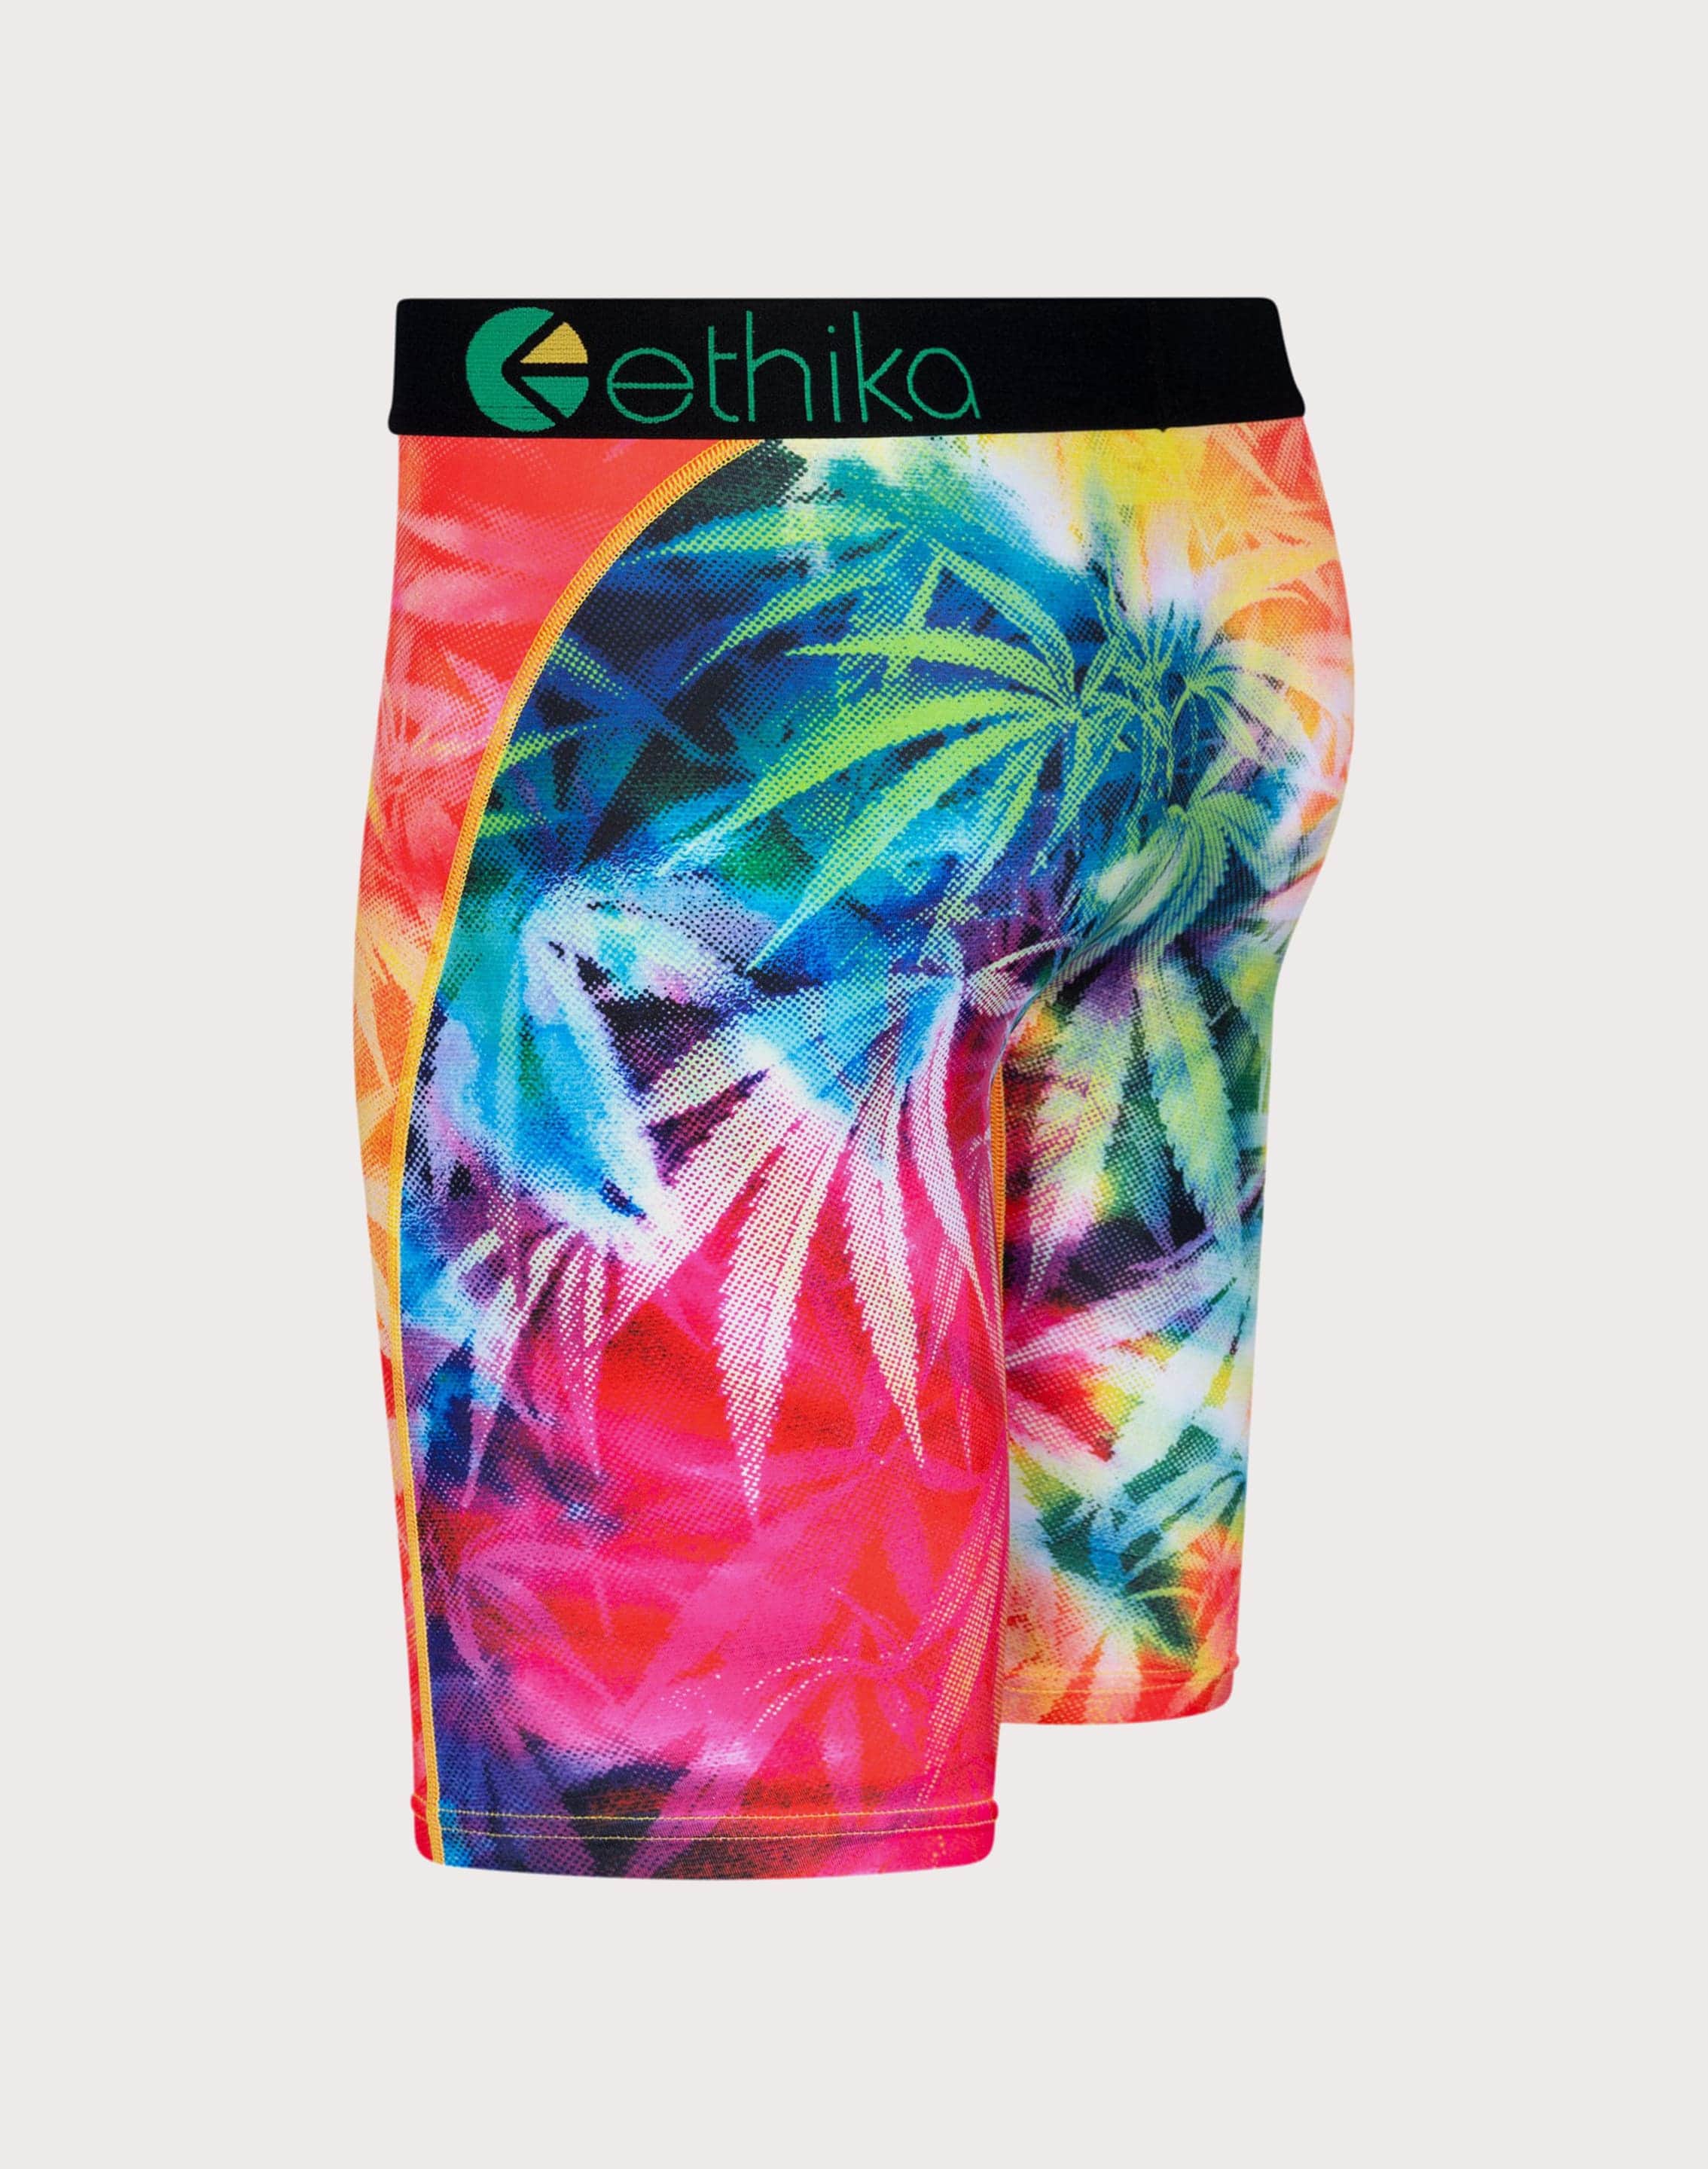 Ethika Staple Boxer Brief  Urban Outfitters Mexico - Clothing, Music, Home  & Accessories